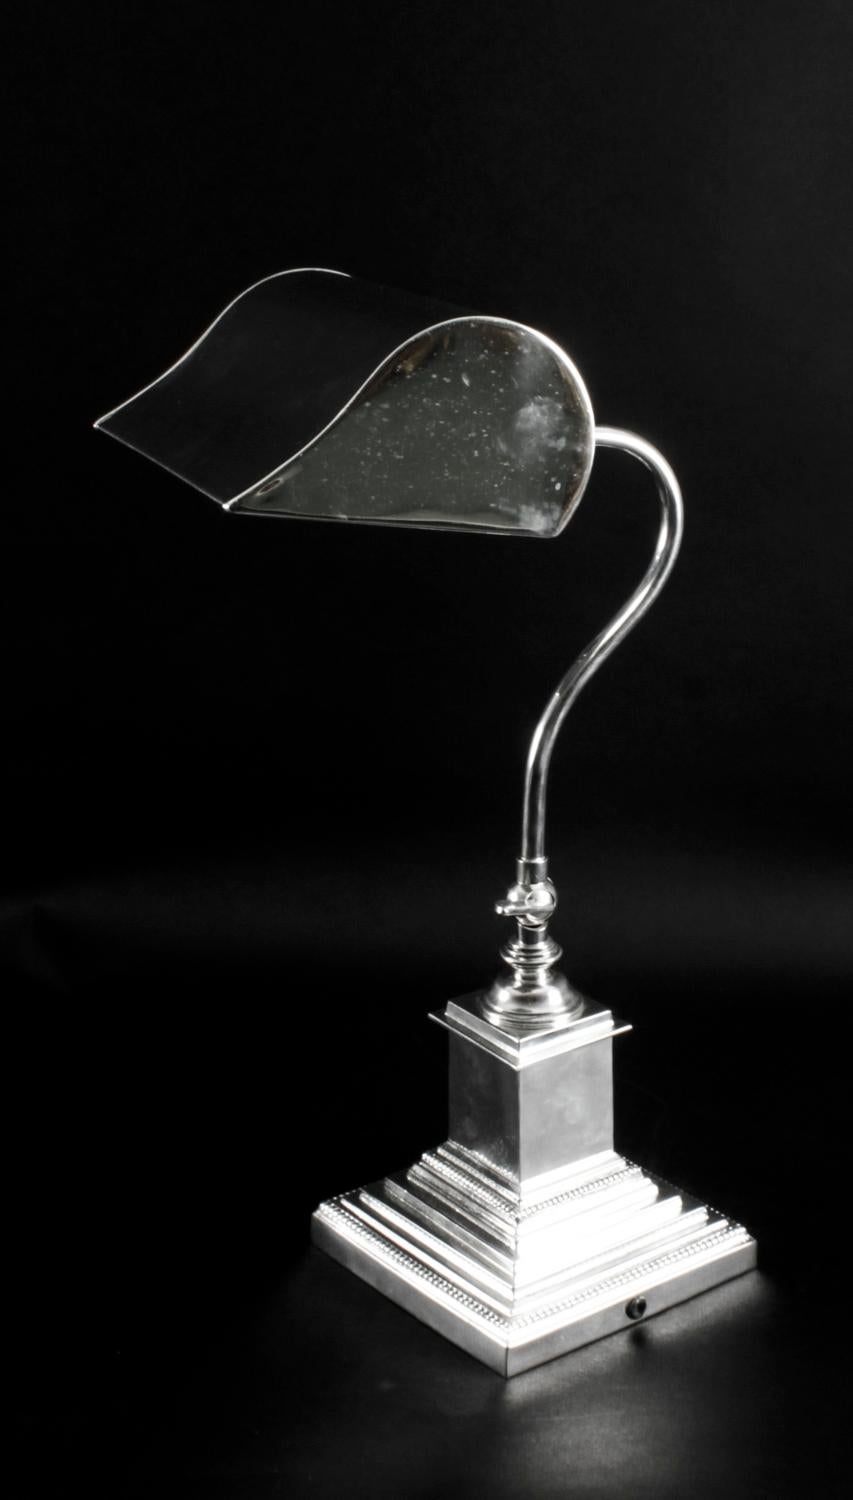 This is a truly superb antique silver plated bankers lamp, circa 1920 in date.

It is silver plated on brass, has an adjustable stem and is raised on a stepped square Corinthian style base.
 
The craftsmanship is second to none throughout all